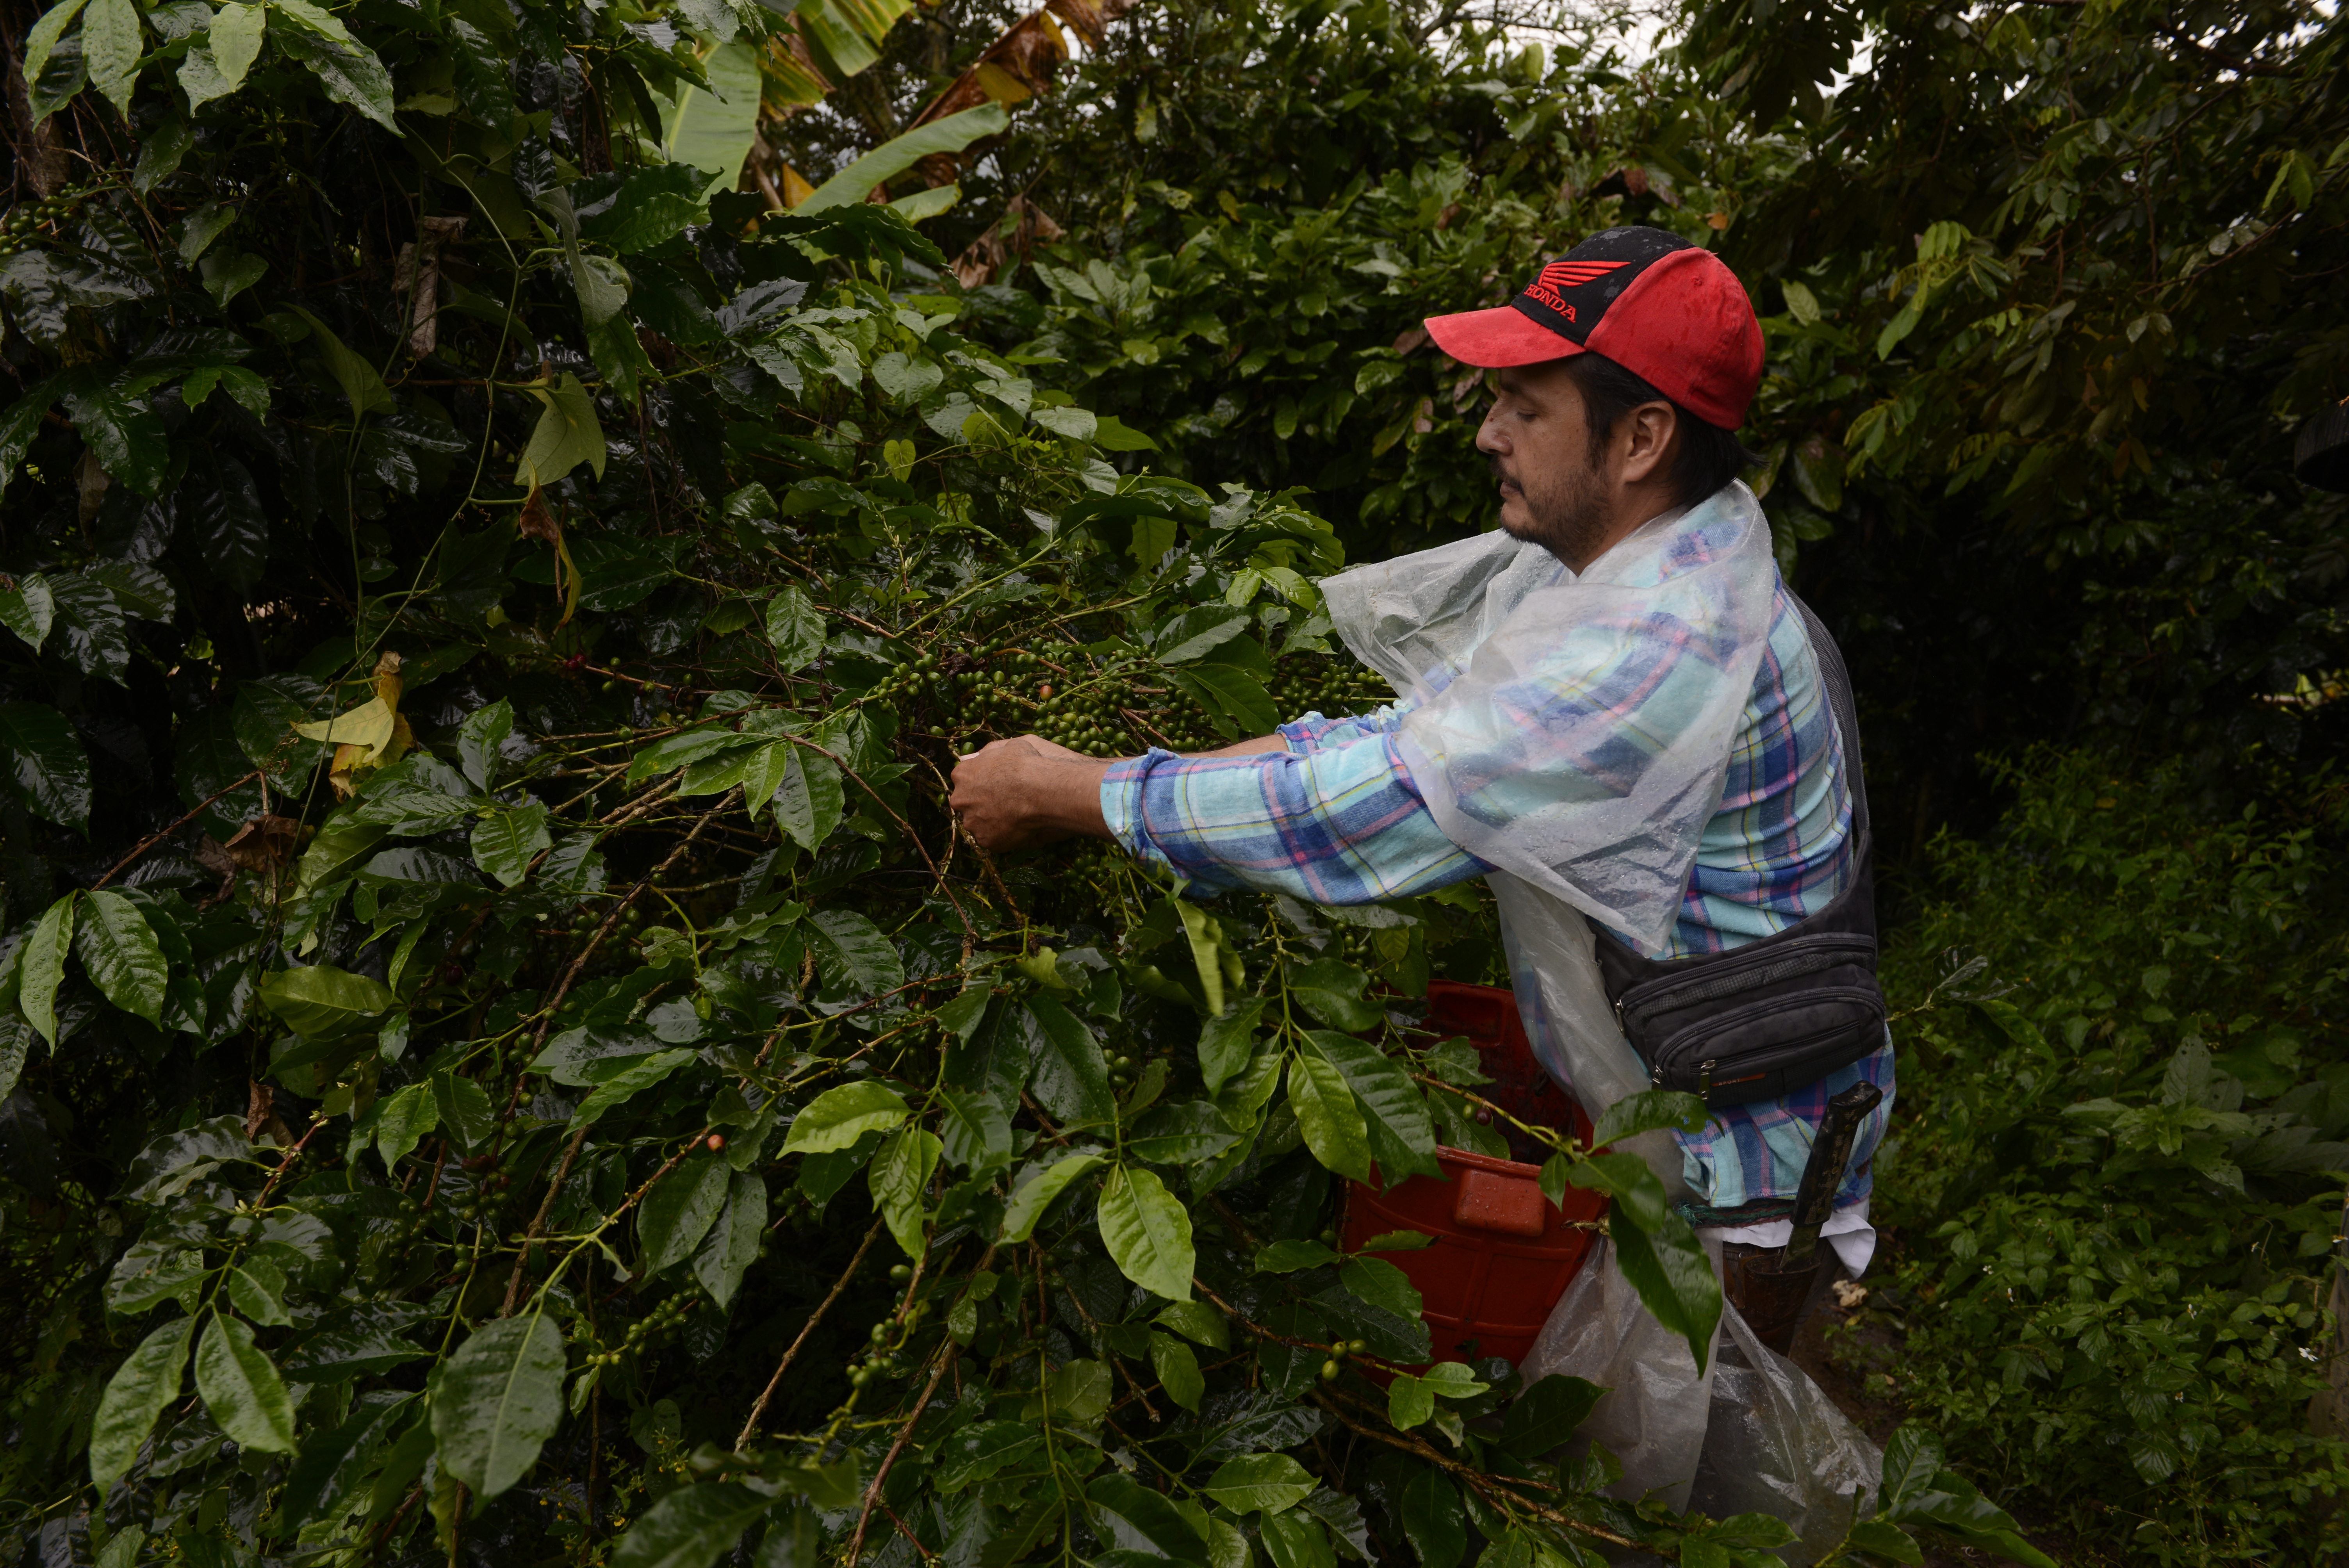 Colombian farmers teach others to work with nature for healthy and sustainable food